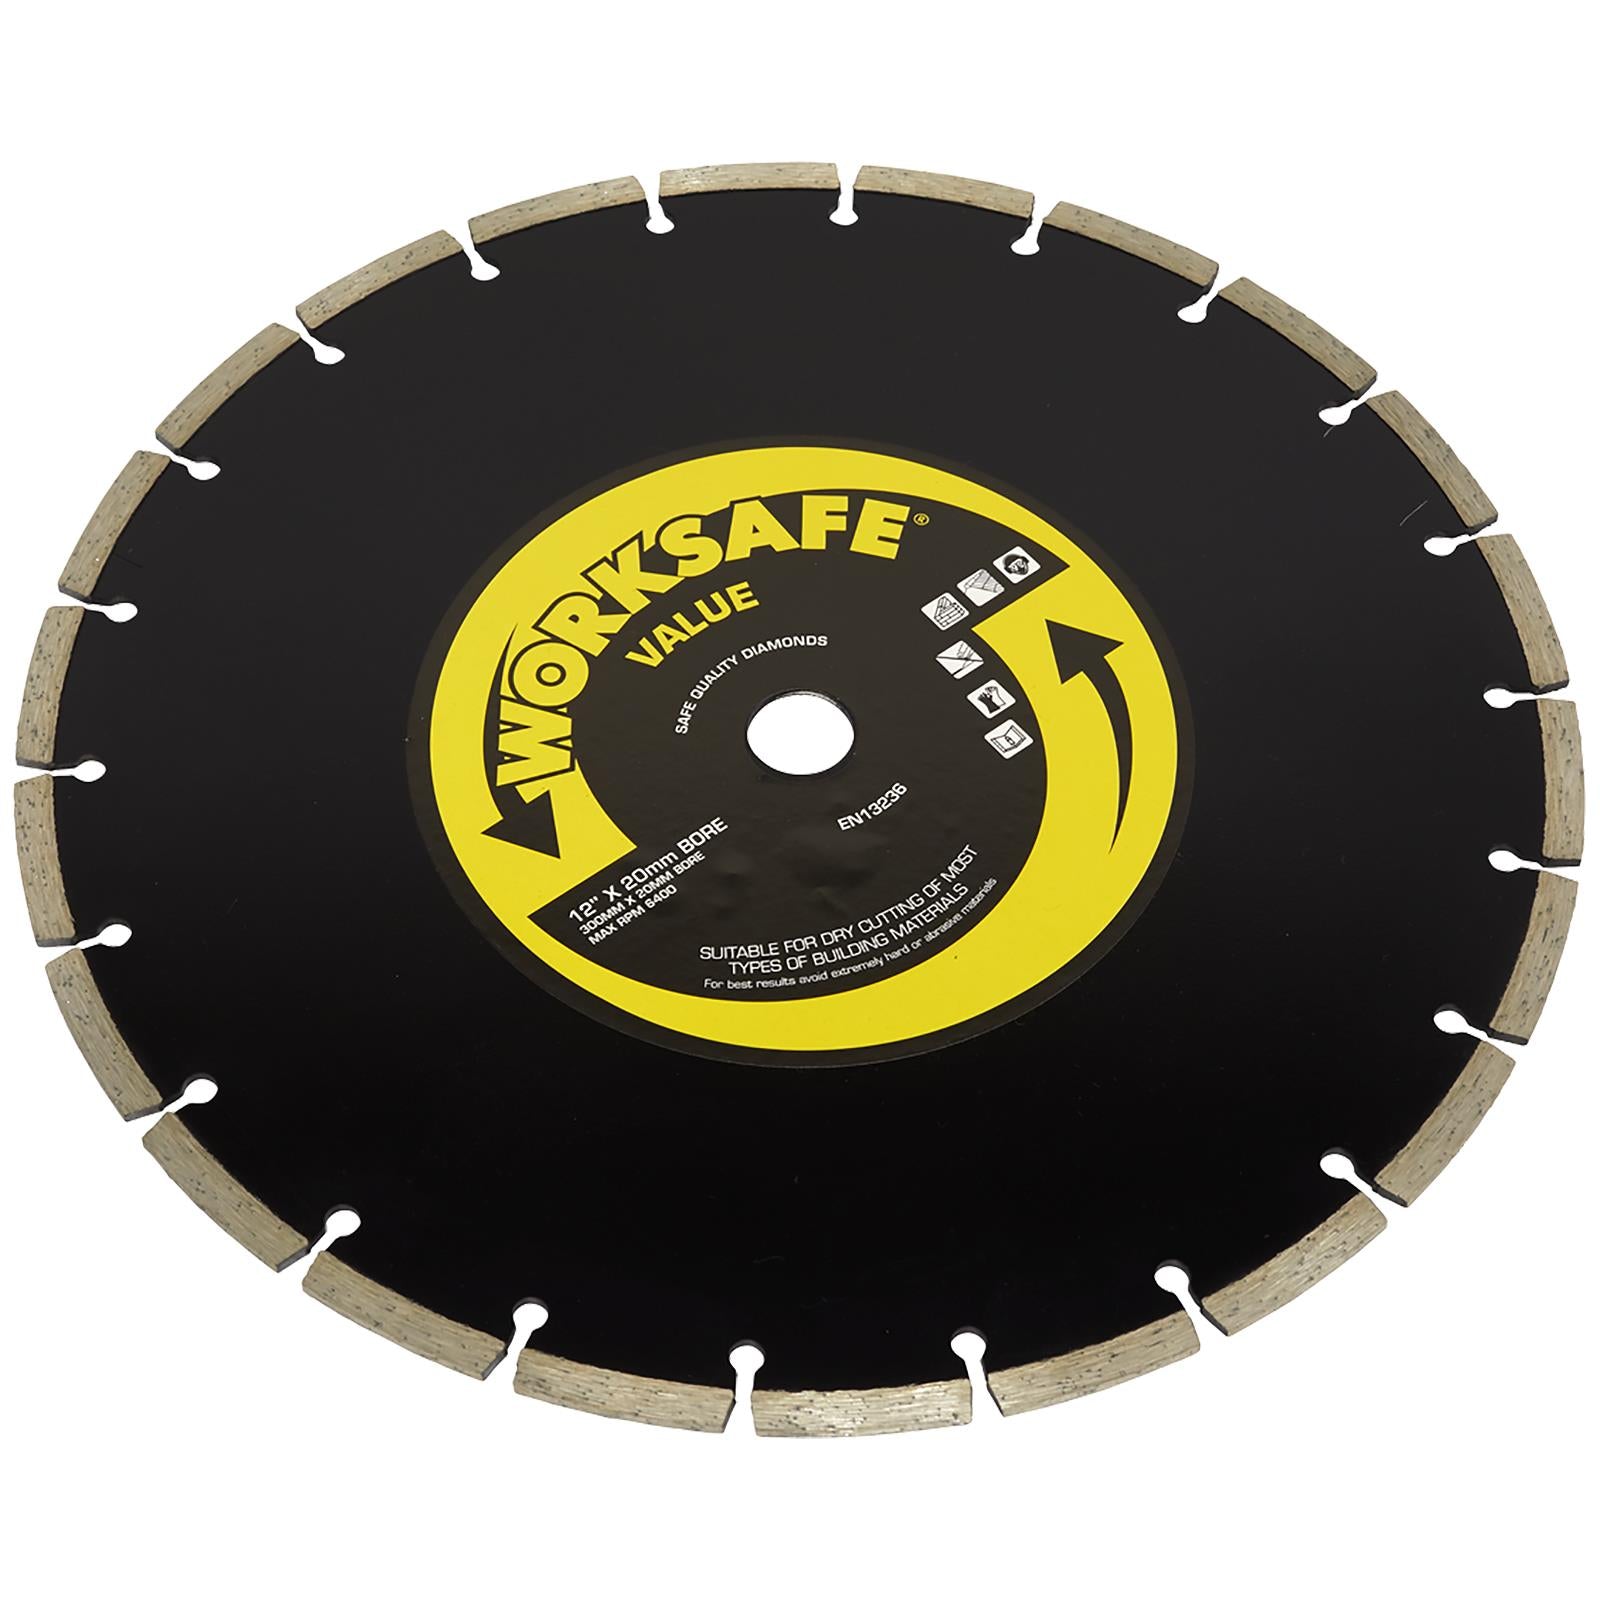 Worksafe by Sealey Diamond Cutting Blade 300mm x 20mm Bore Value